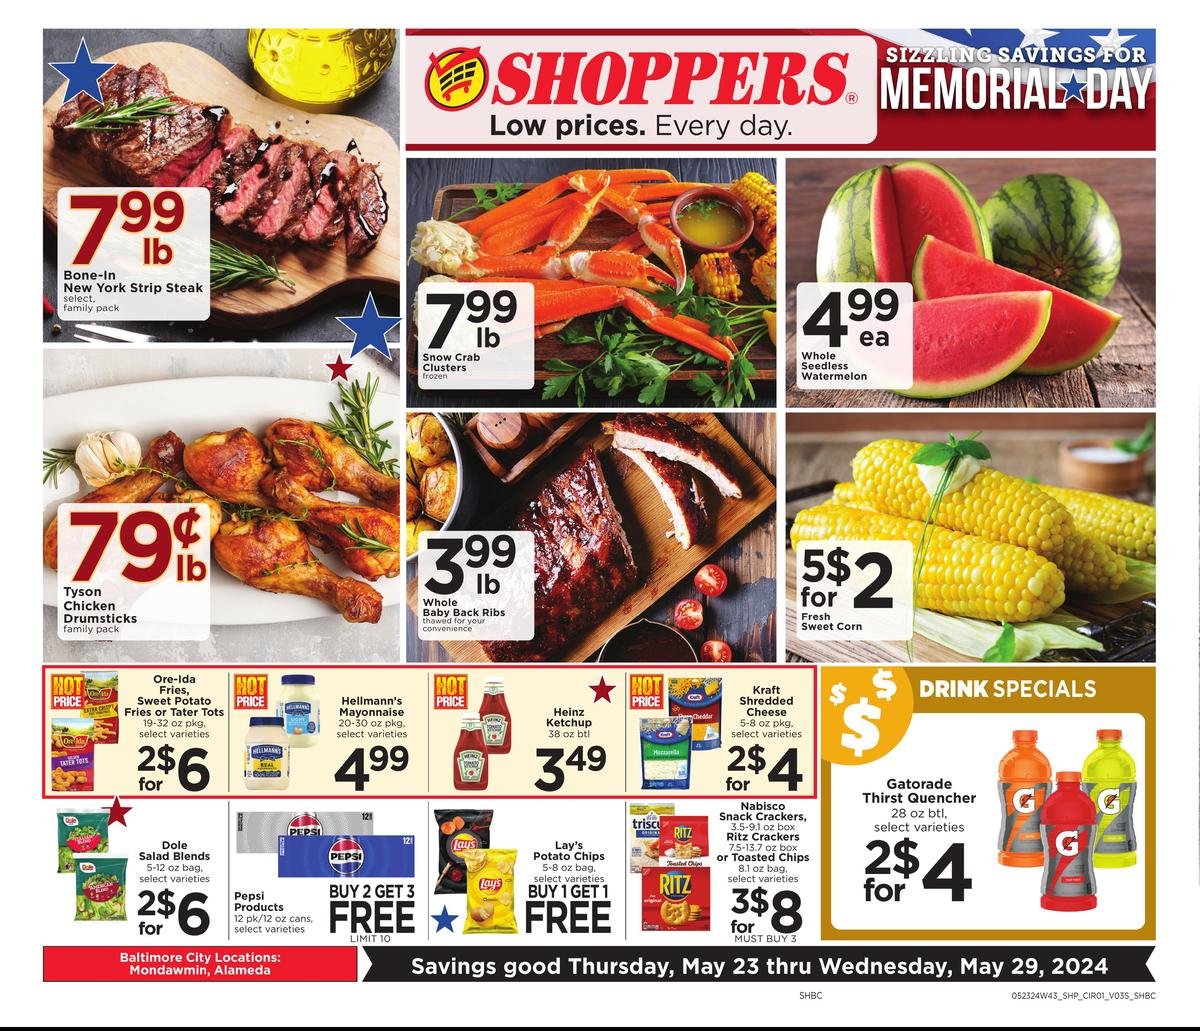 Shoppers weekly ad - page 1